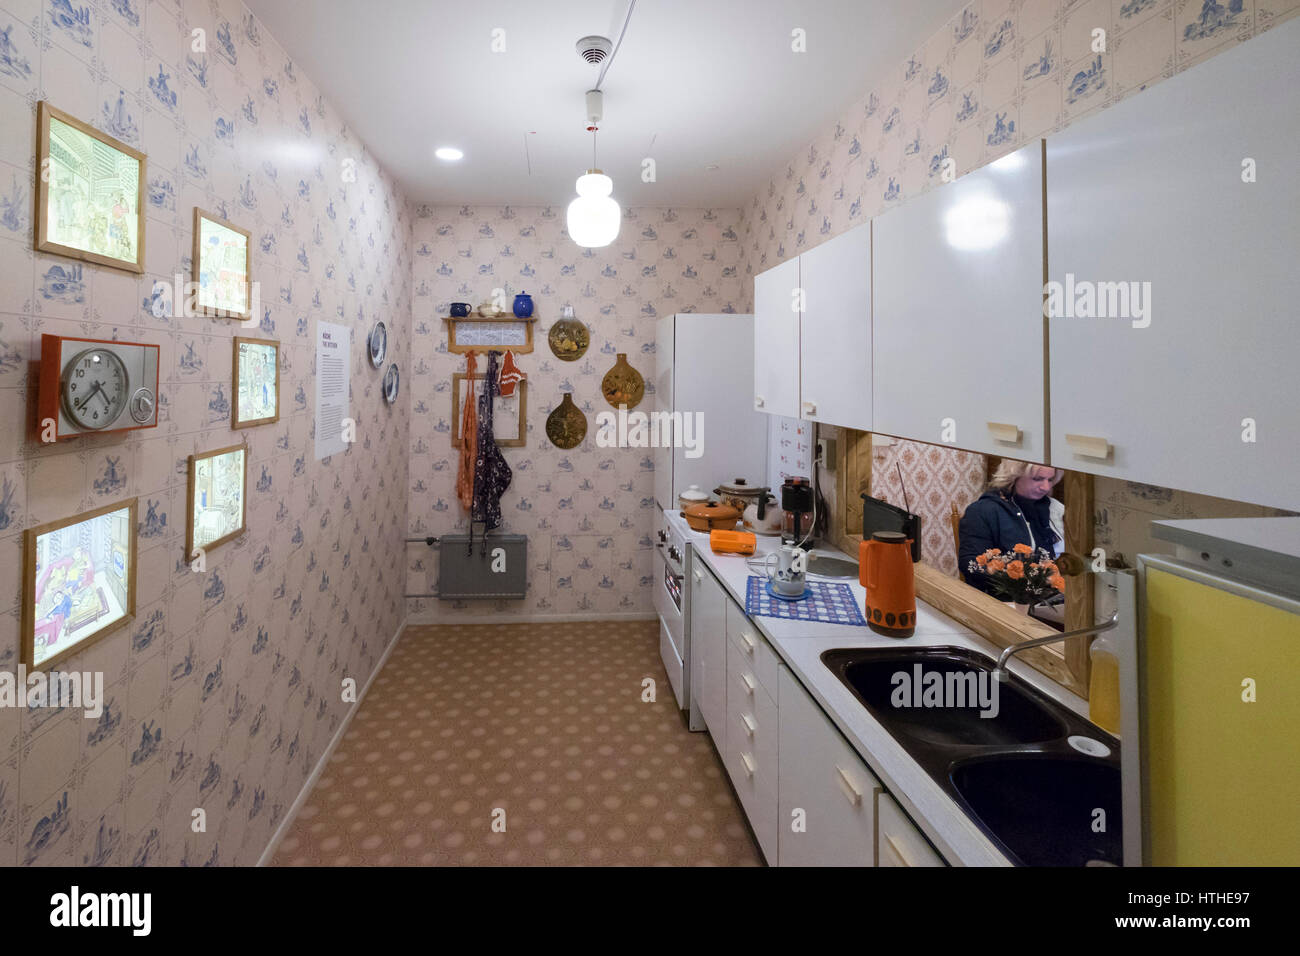 Kitchen of model East German apartment at DDR Museum, showing life in former East Germany,  in Mitte Berlin, Germany Stock Photo